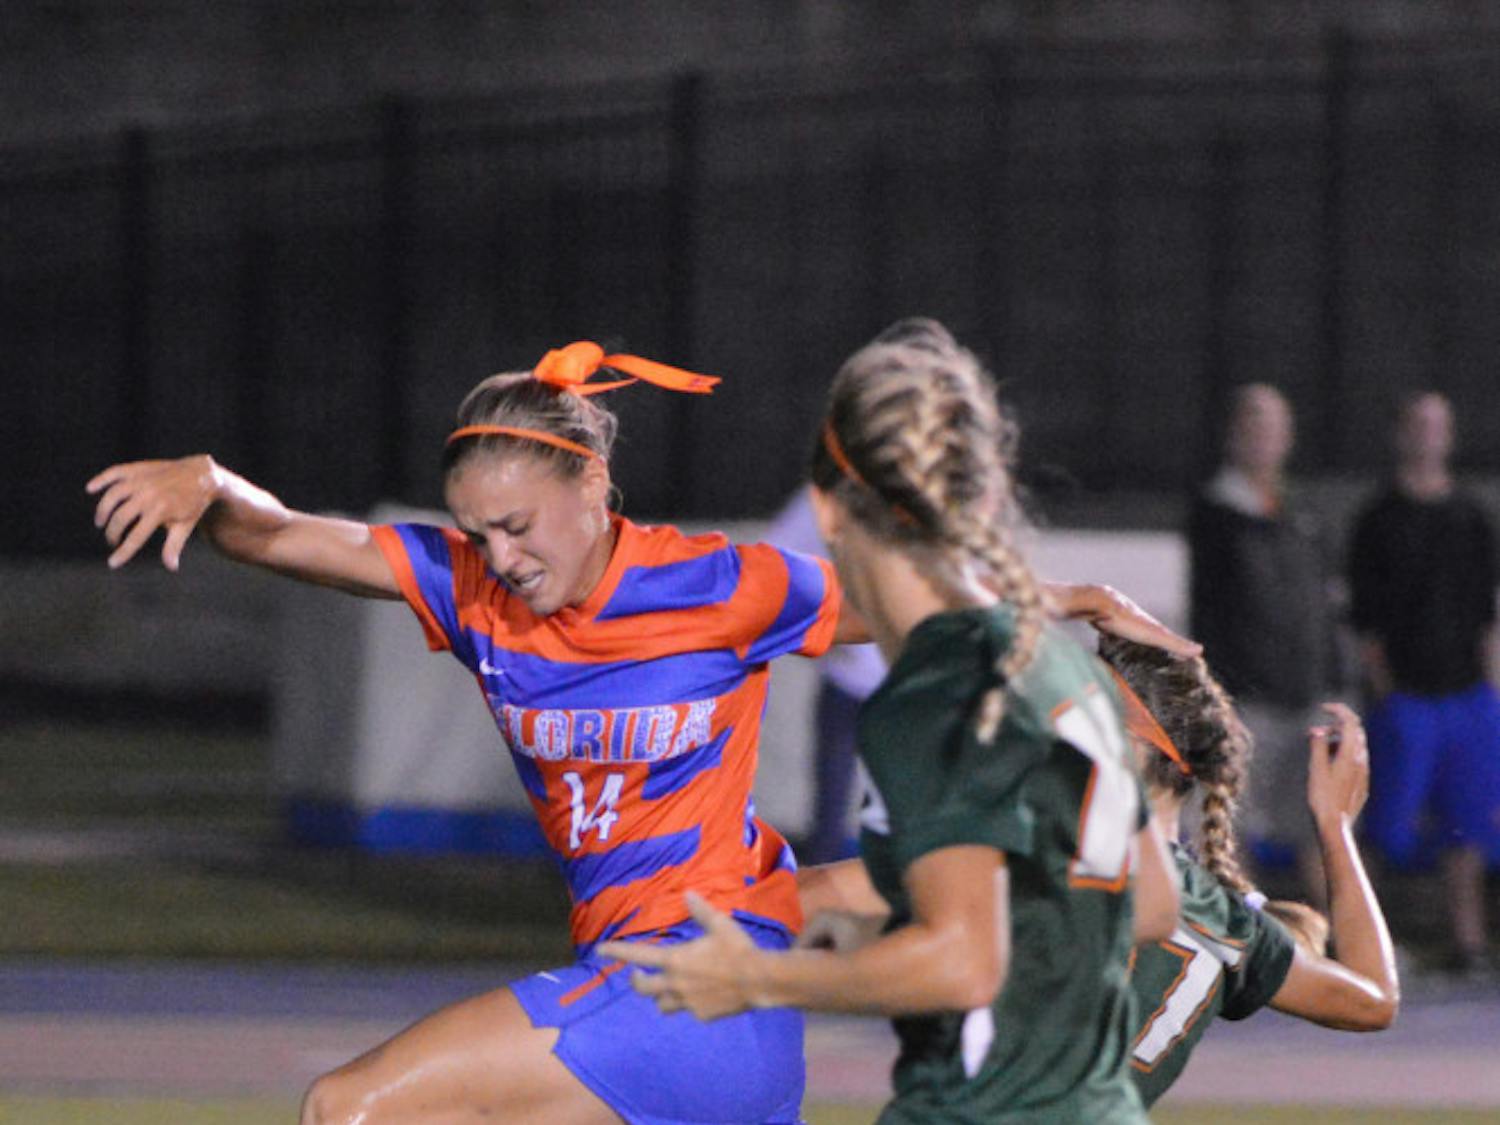 Florida senior forward Jillian Graff fights for possession with two Miami players during the Gators' 3-0 win against the Hurricanes on Friday night at James G. Pressly Stadium. Graff scored the first two goals of the match.